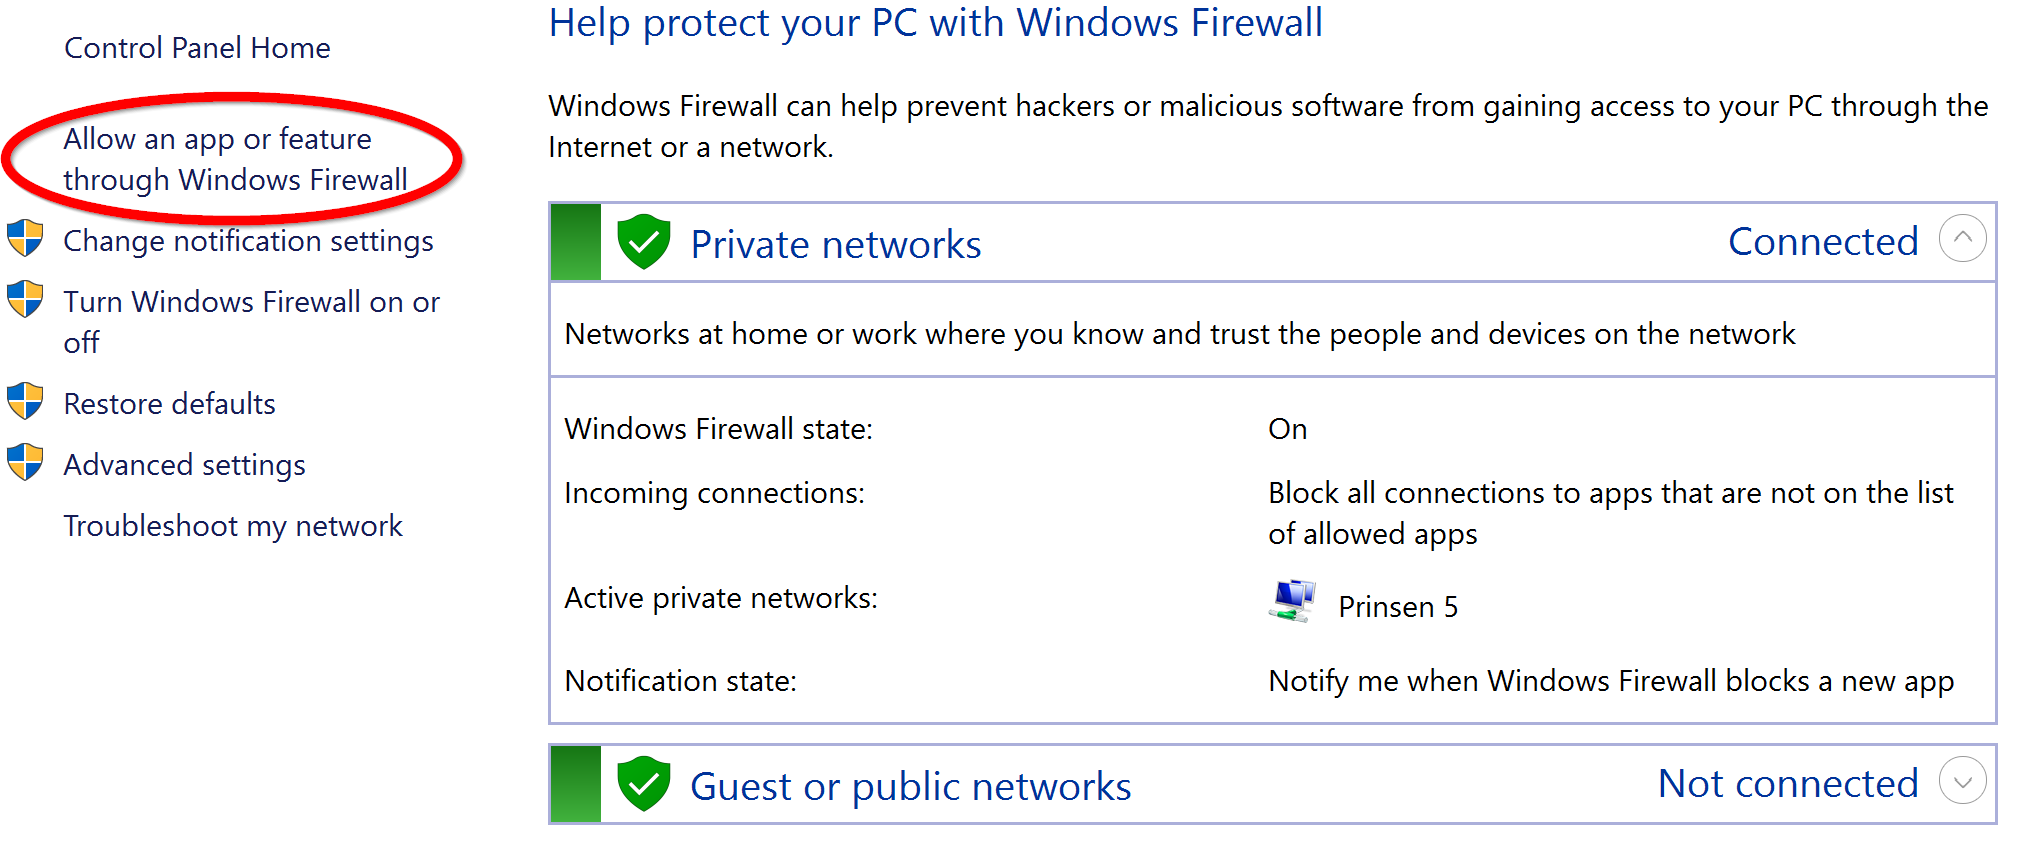 Screenshot of the Windows Firewall Control panel in Windows 8 and 10